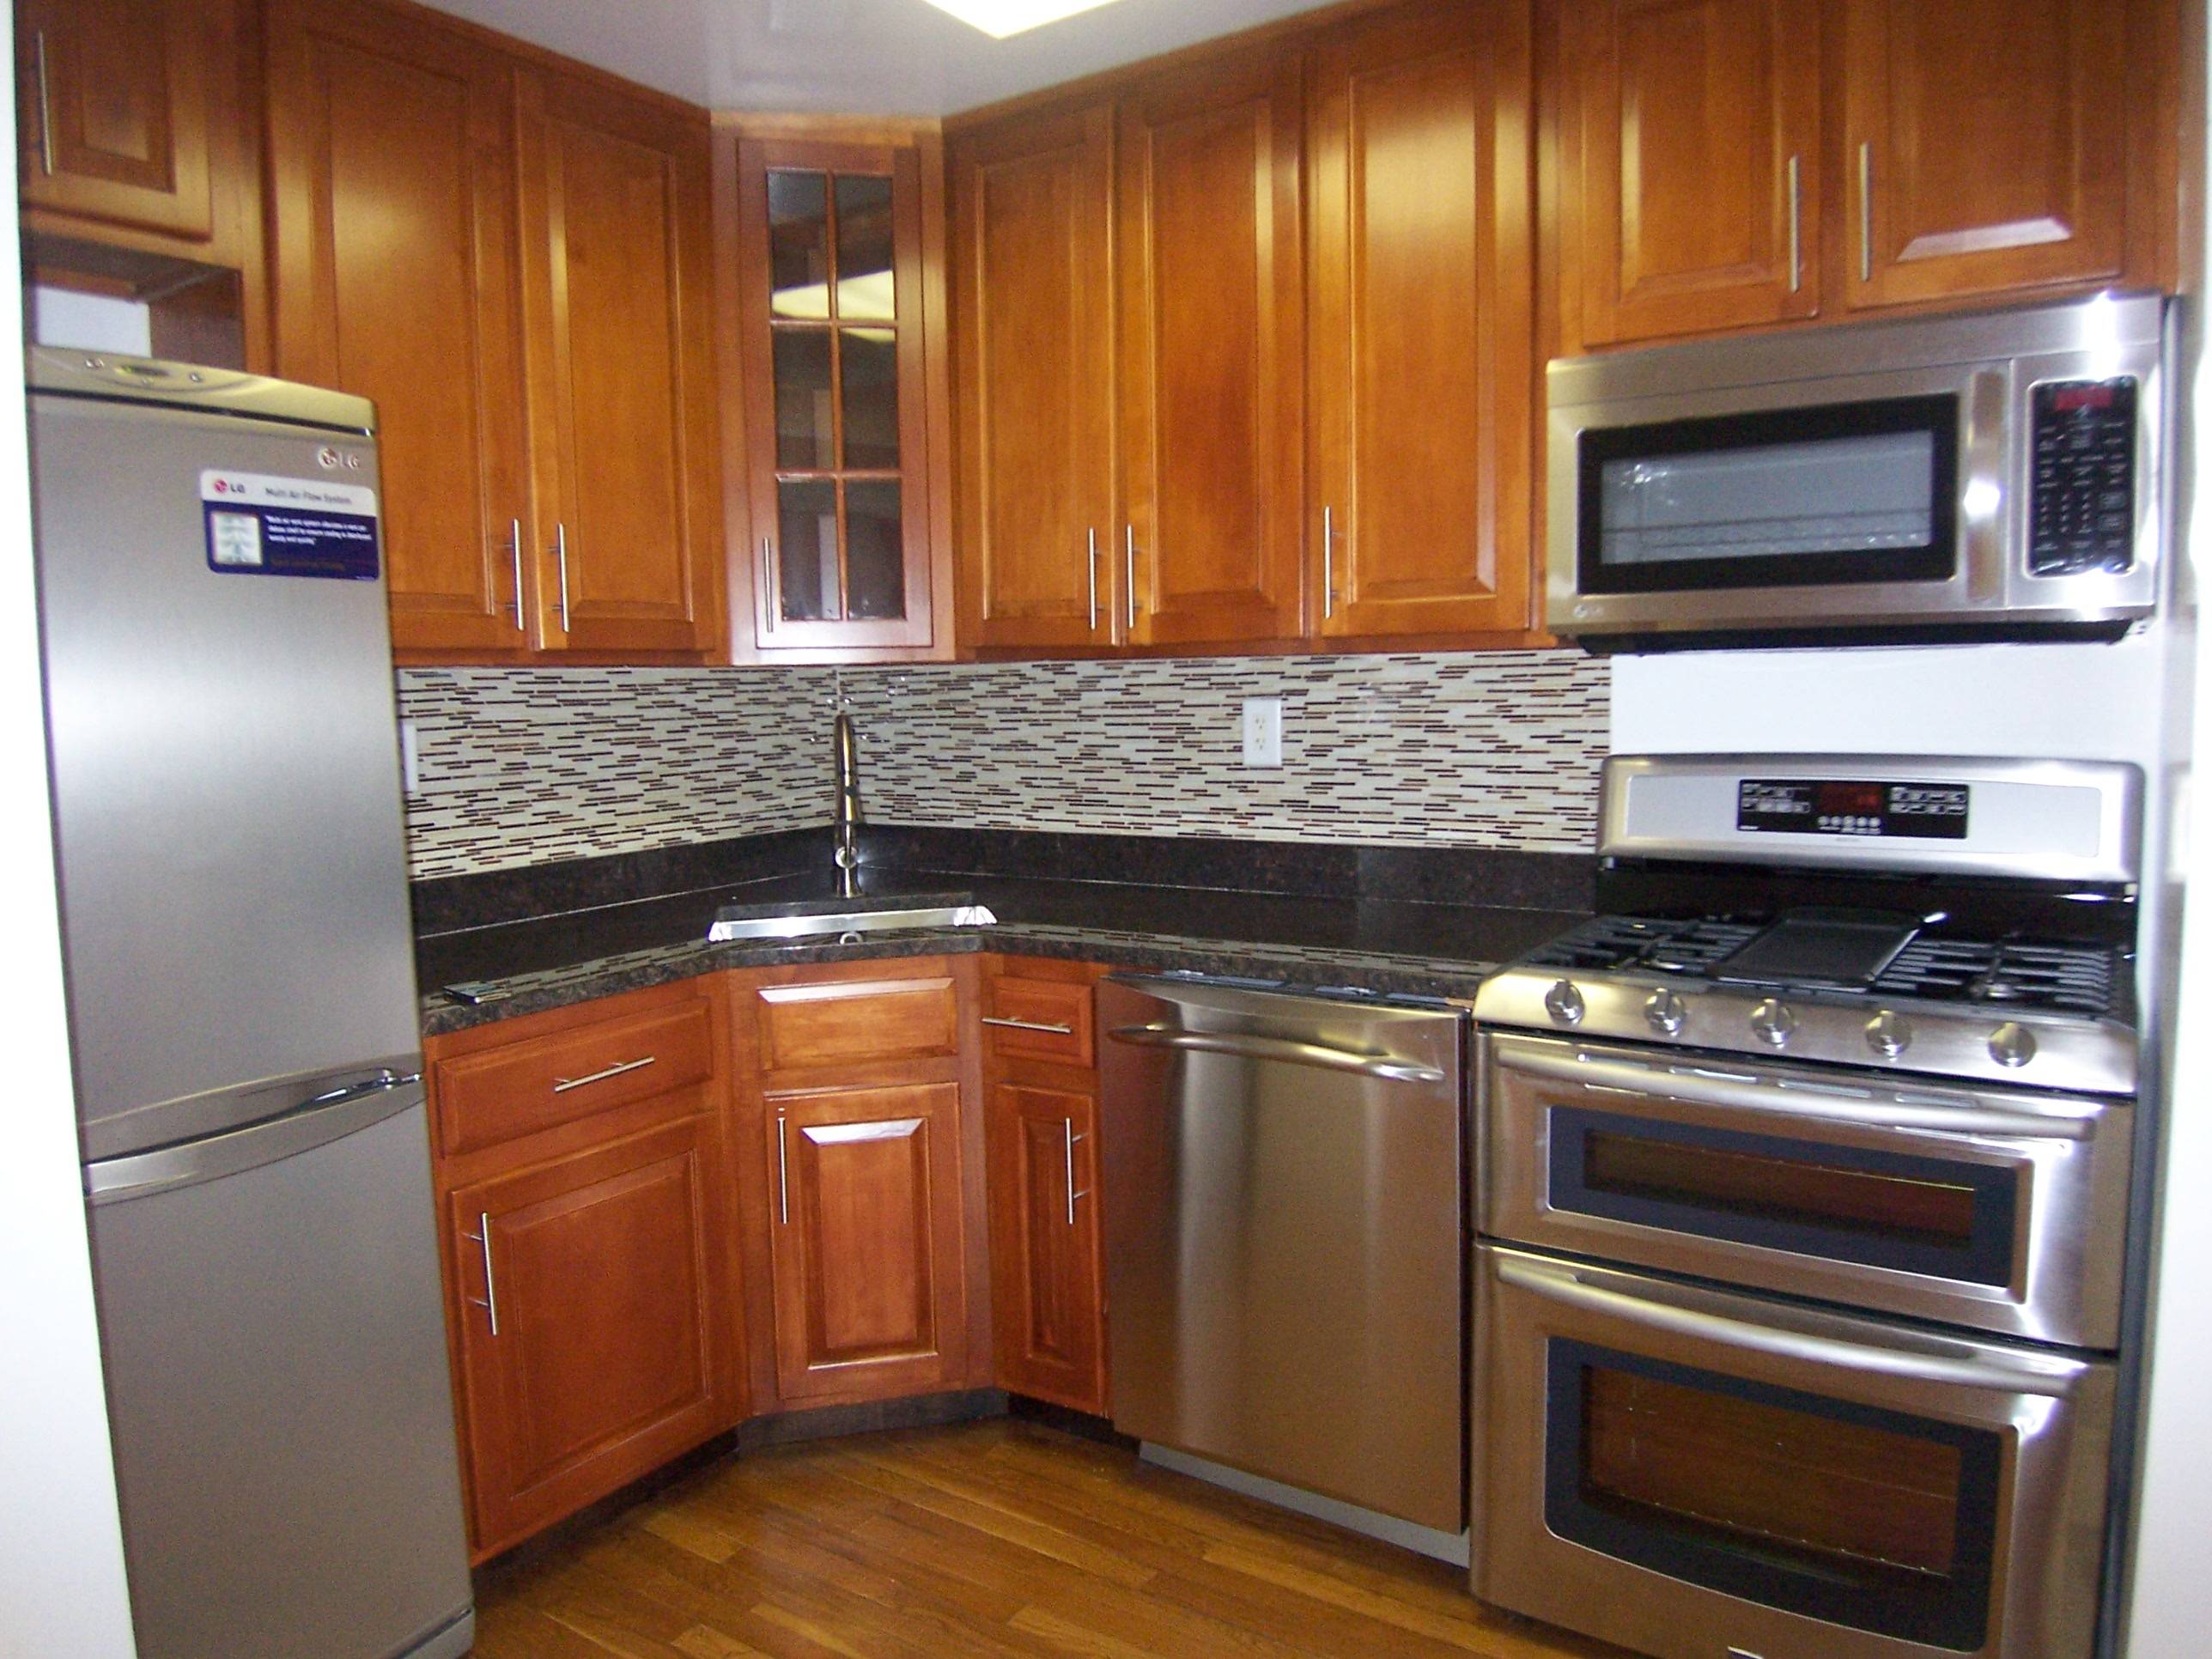 UWS Renovated Two Bedroom Duplex Condo for Sale - Many Other Condos Available in all Price Ranges